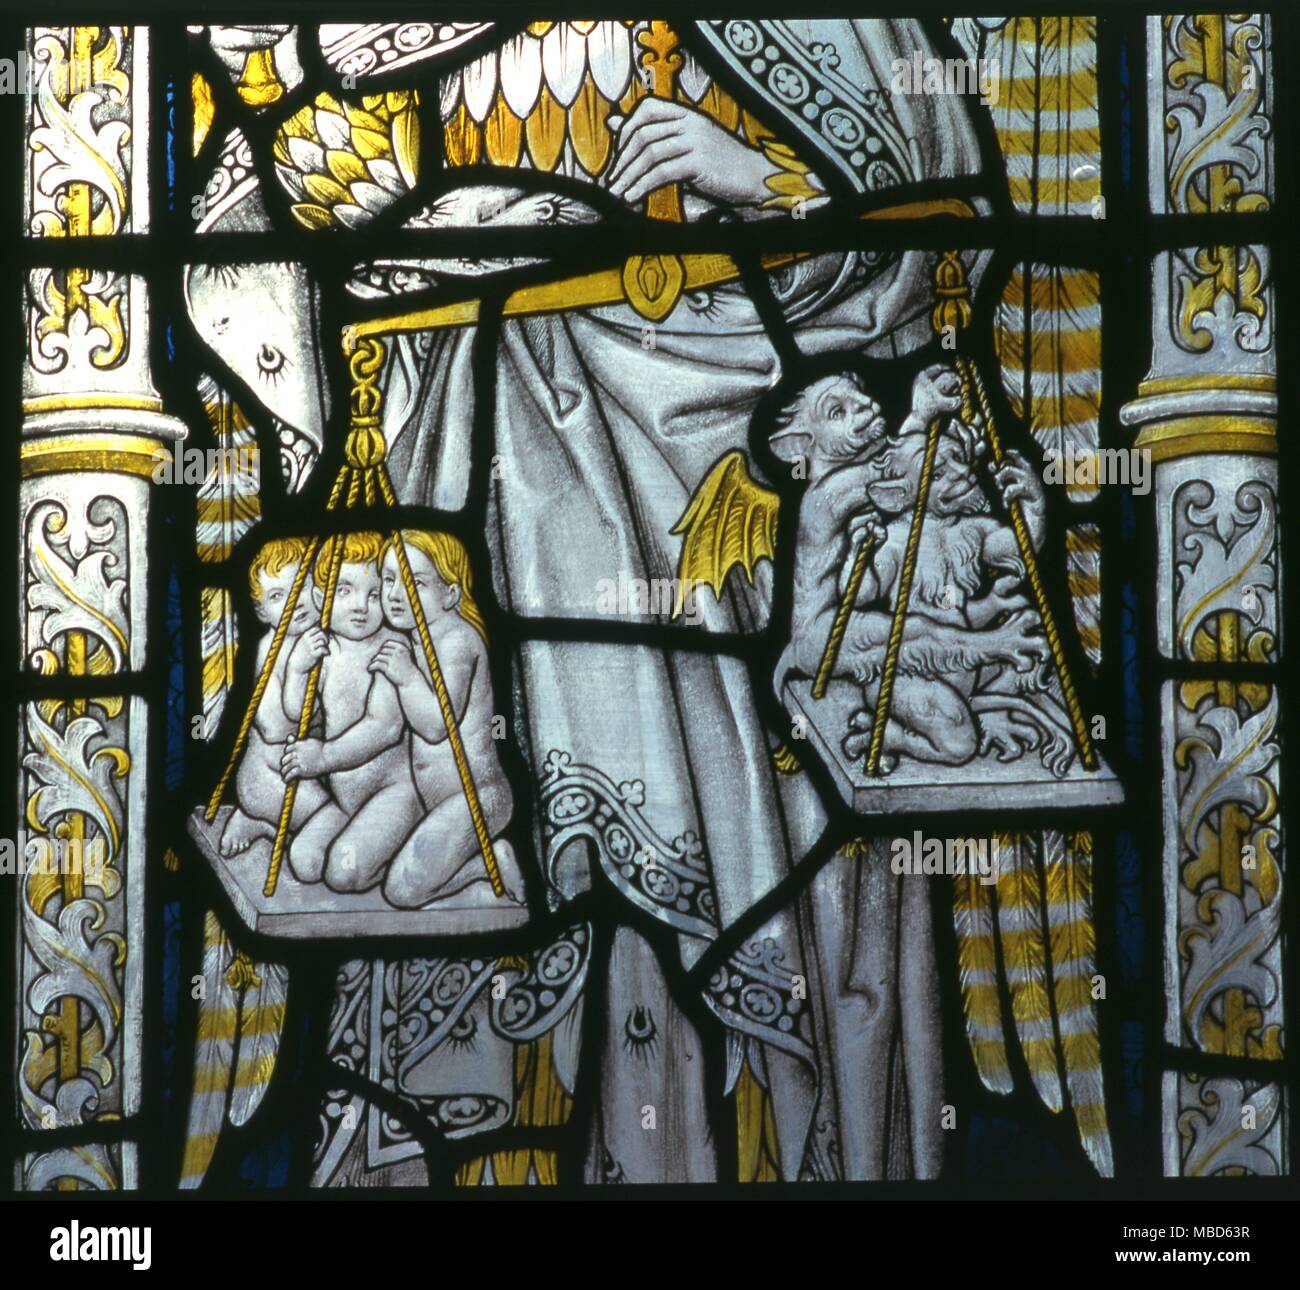 Christian - Human souls Newly departed souls in the balance of the archangel Michael, being balanced against demonic sins. From the cloister windows of Chester Cathedral, dated c 1921 - 28 Stock Photo